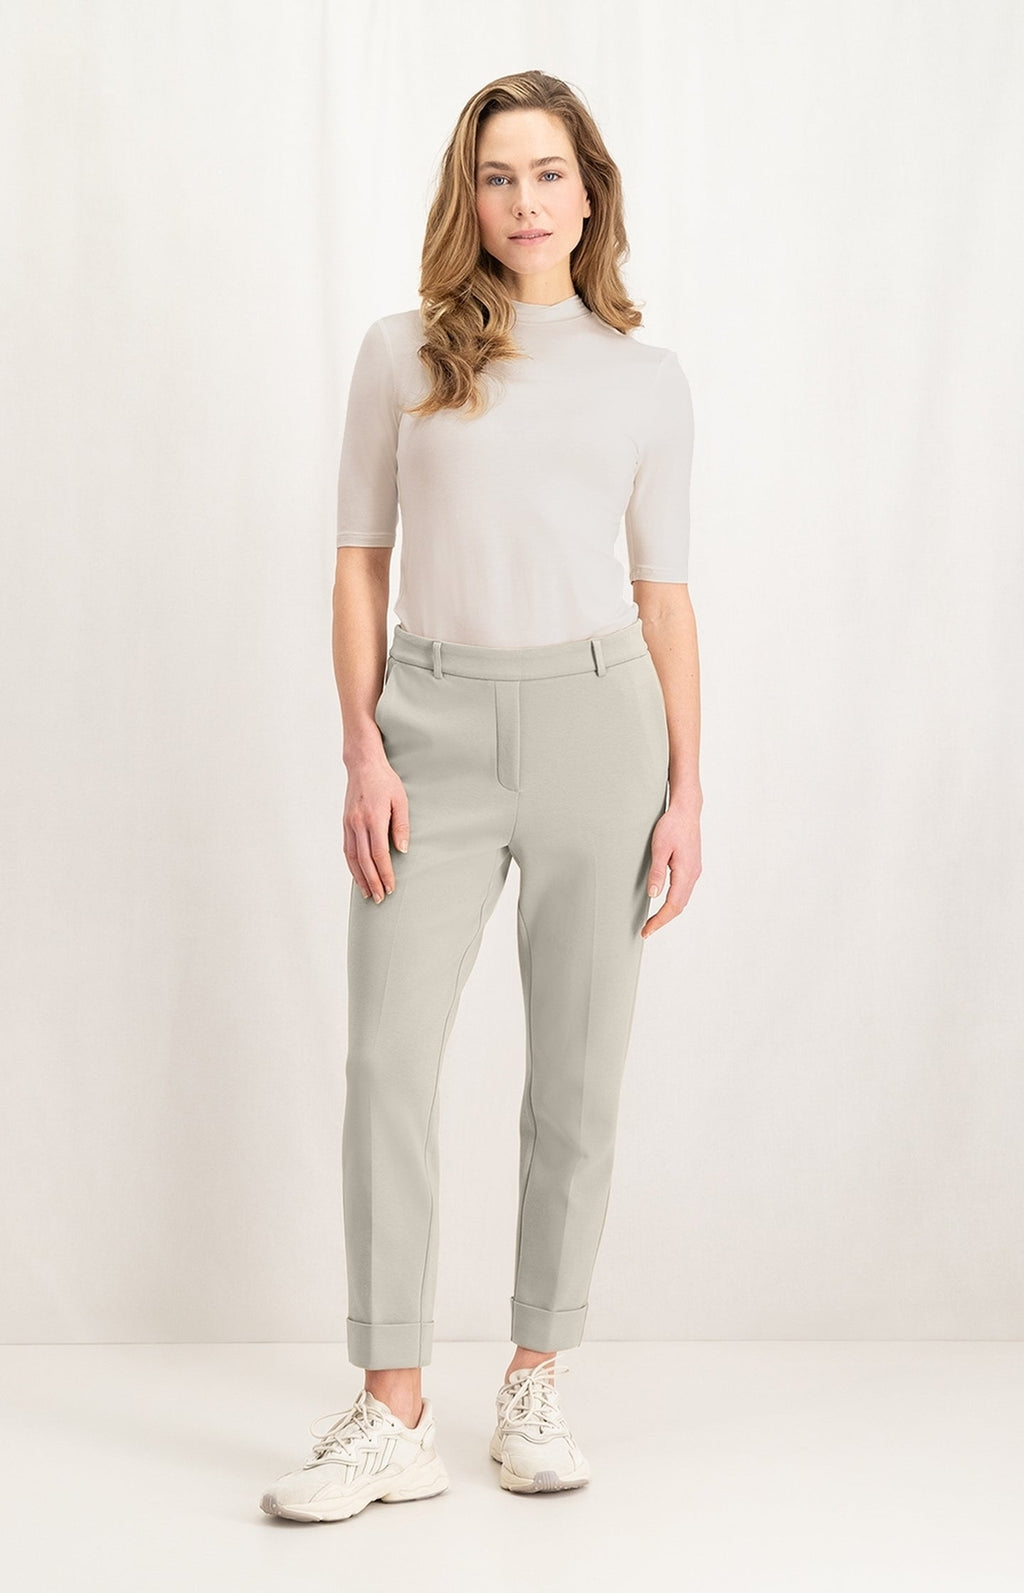 <p>YAYA jersey turn up style elasticated waistband trousers in stone</p>
<p>Matching blazer available as a co-ordinate </p>